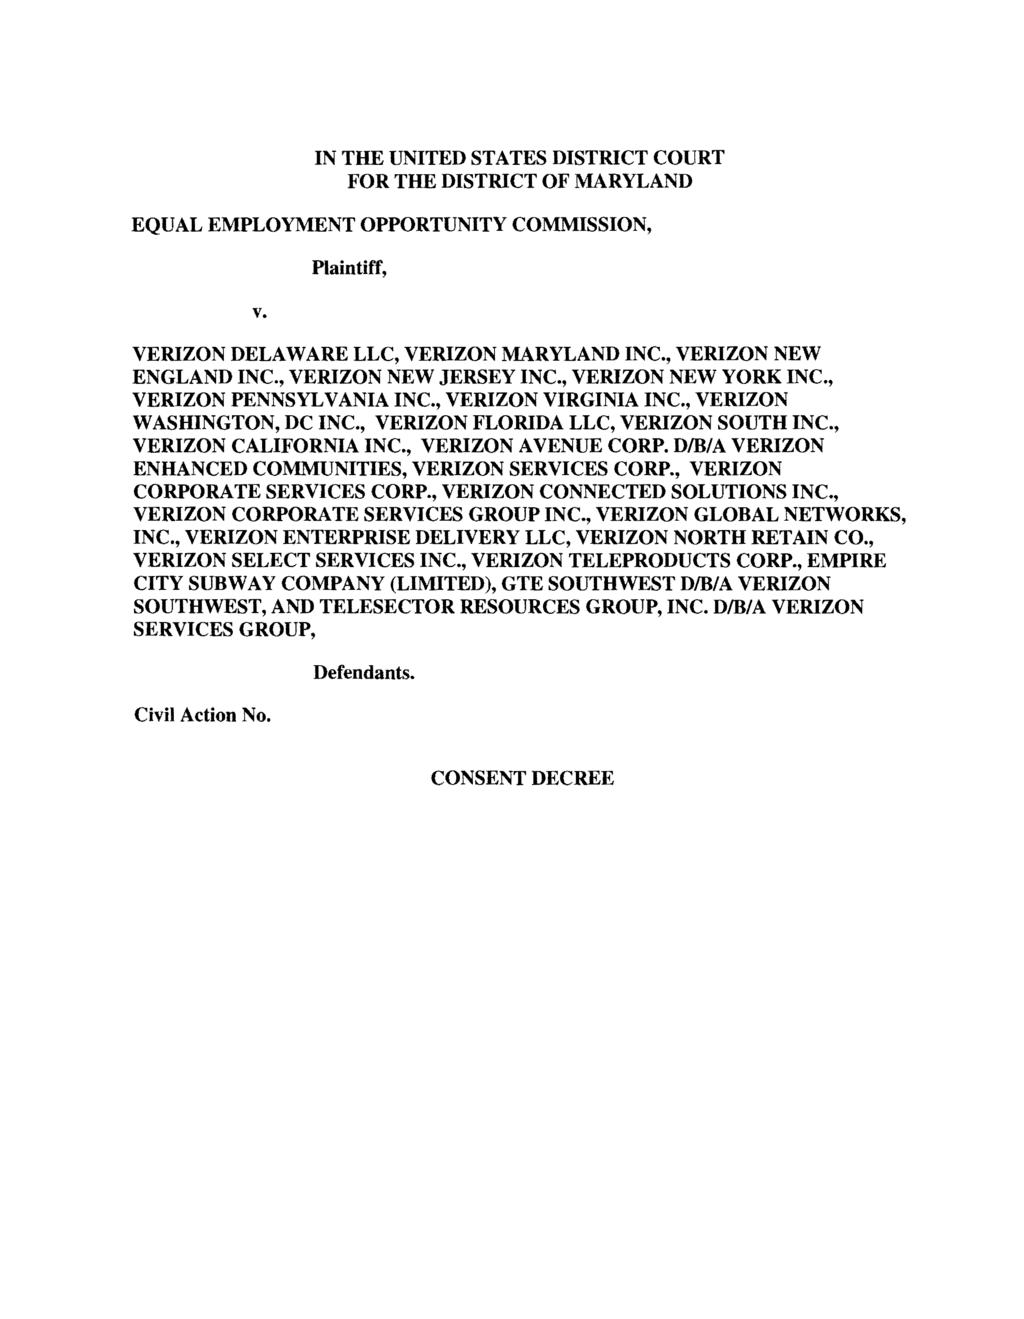 Case 1:11-cv-01832-JKB Document 5 Filed 07/06/11 Page 1 of 36 IN THE UNITED STATES DISTRICT COURT FOR THE DISTRICT OF MARYLAND EQUAL EMPLOYMENT OPPORTUNITY COMMISSION, v.